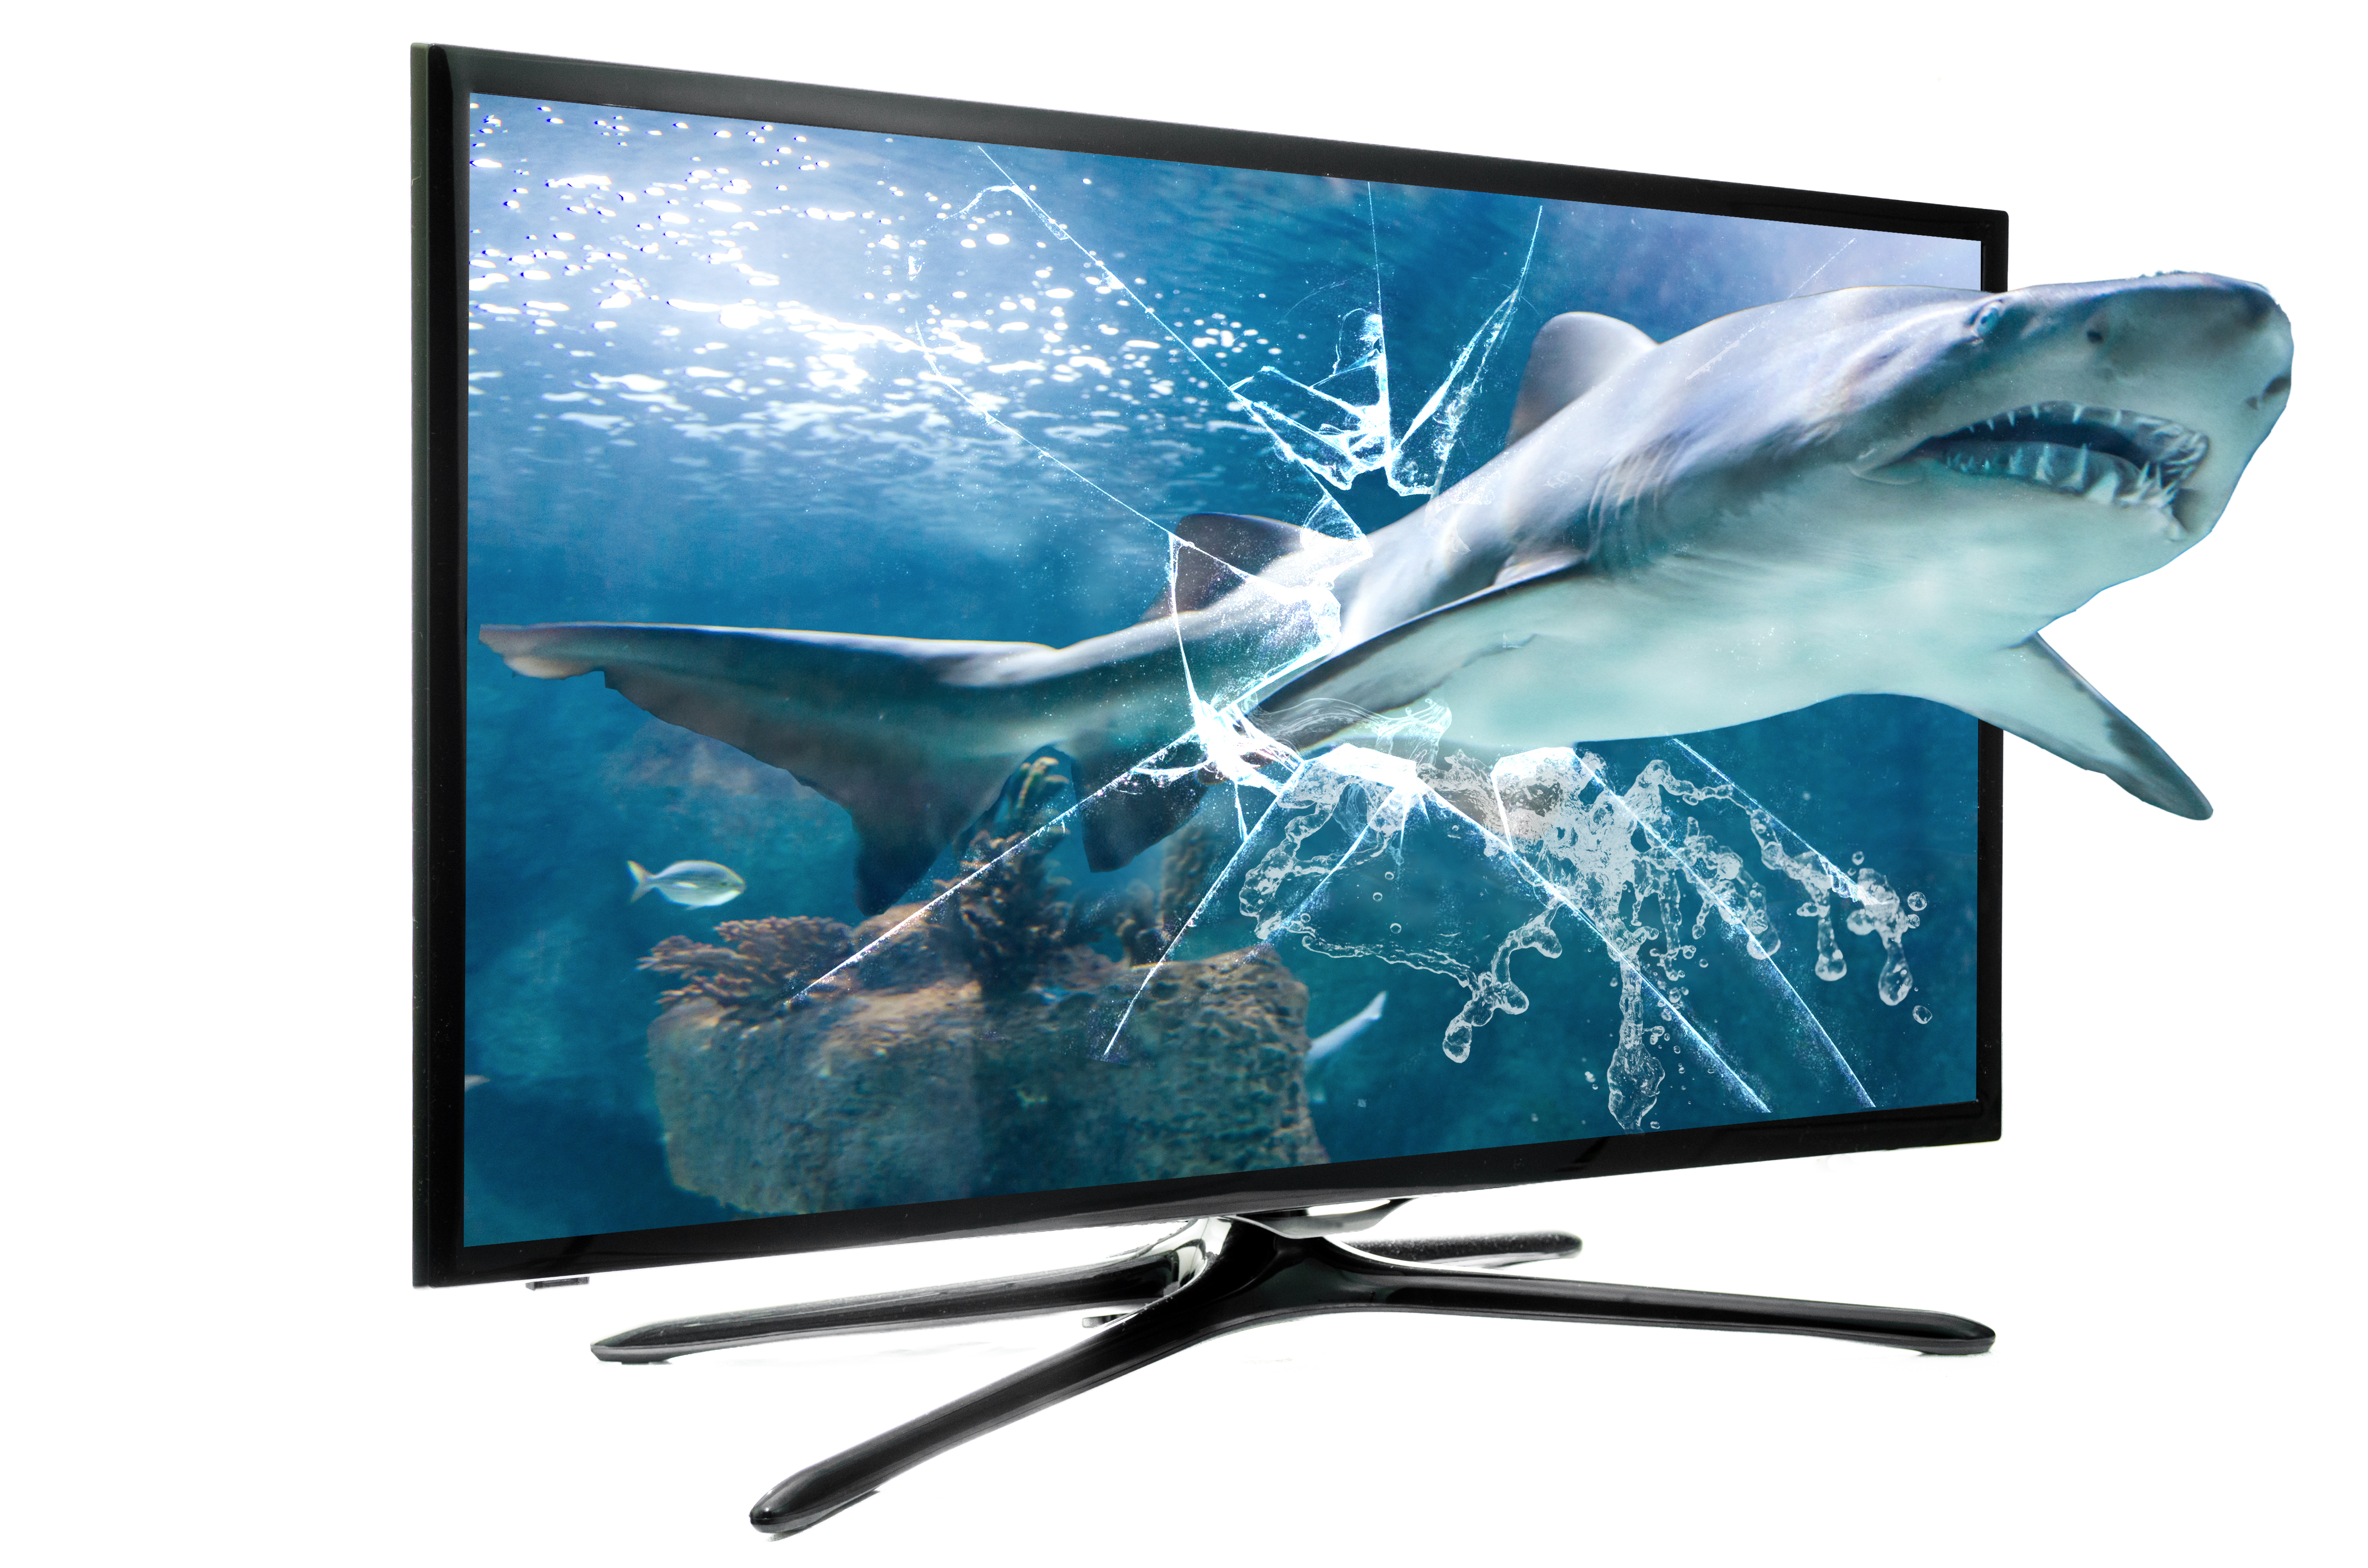 What You Should Look For in a 3D TV